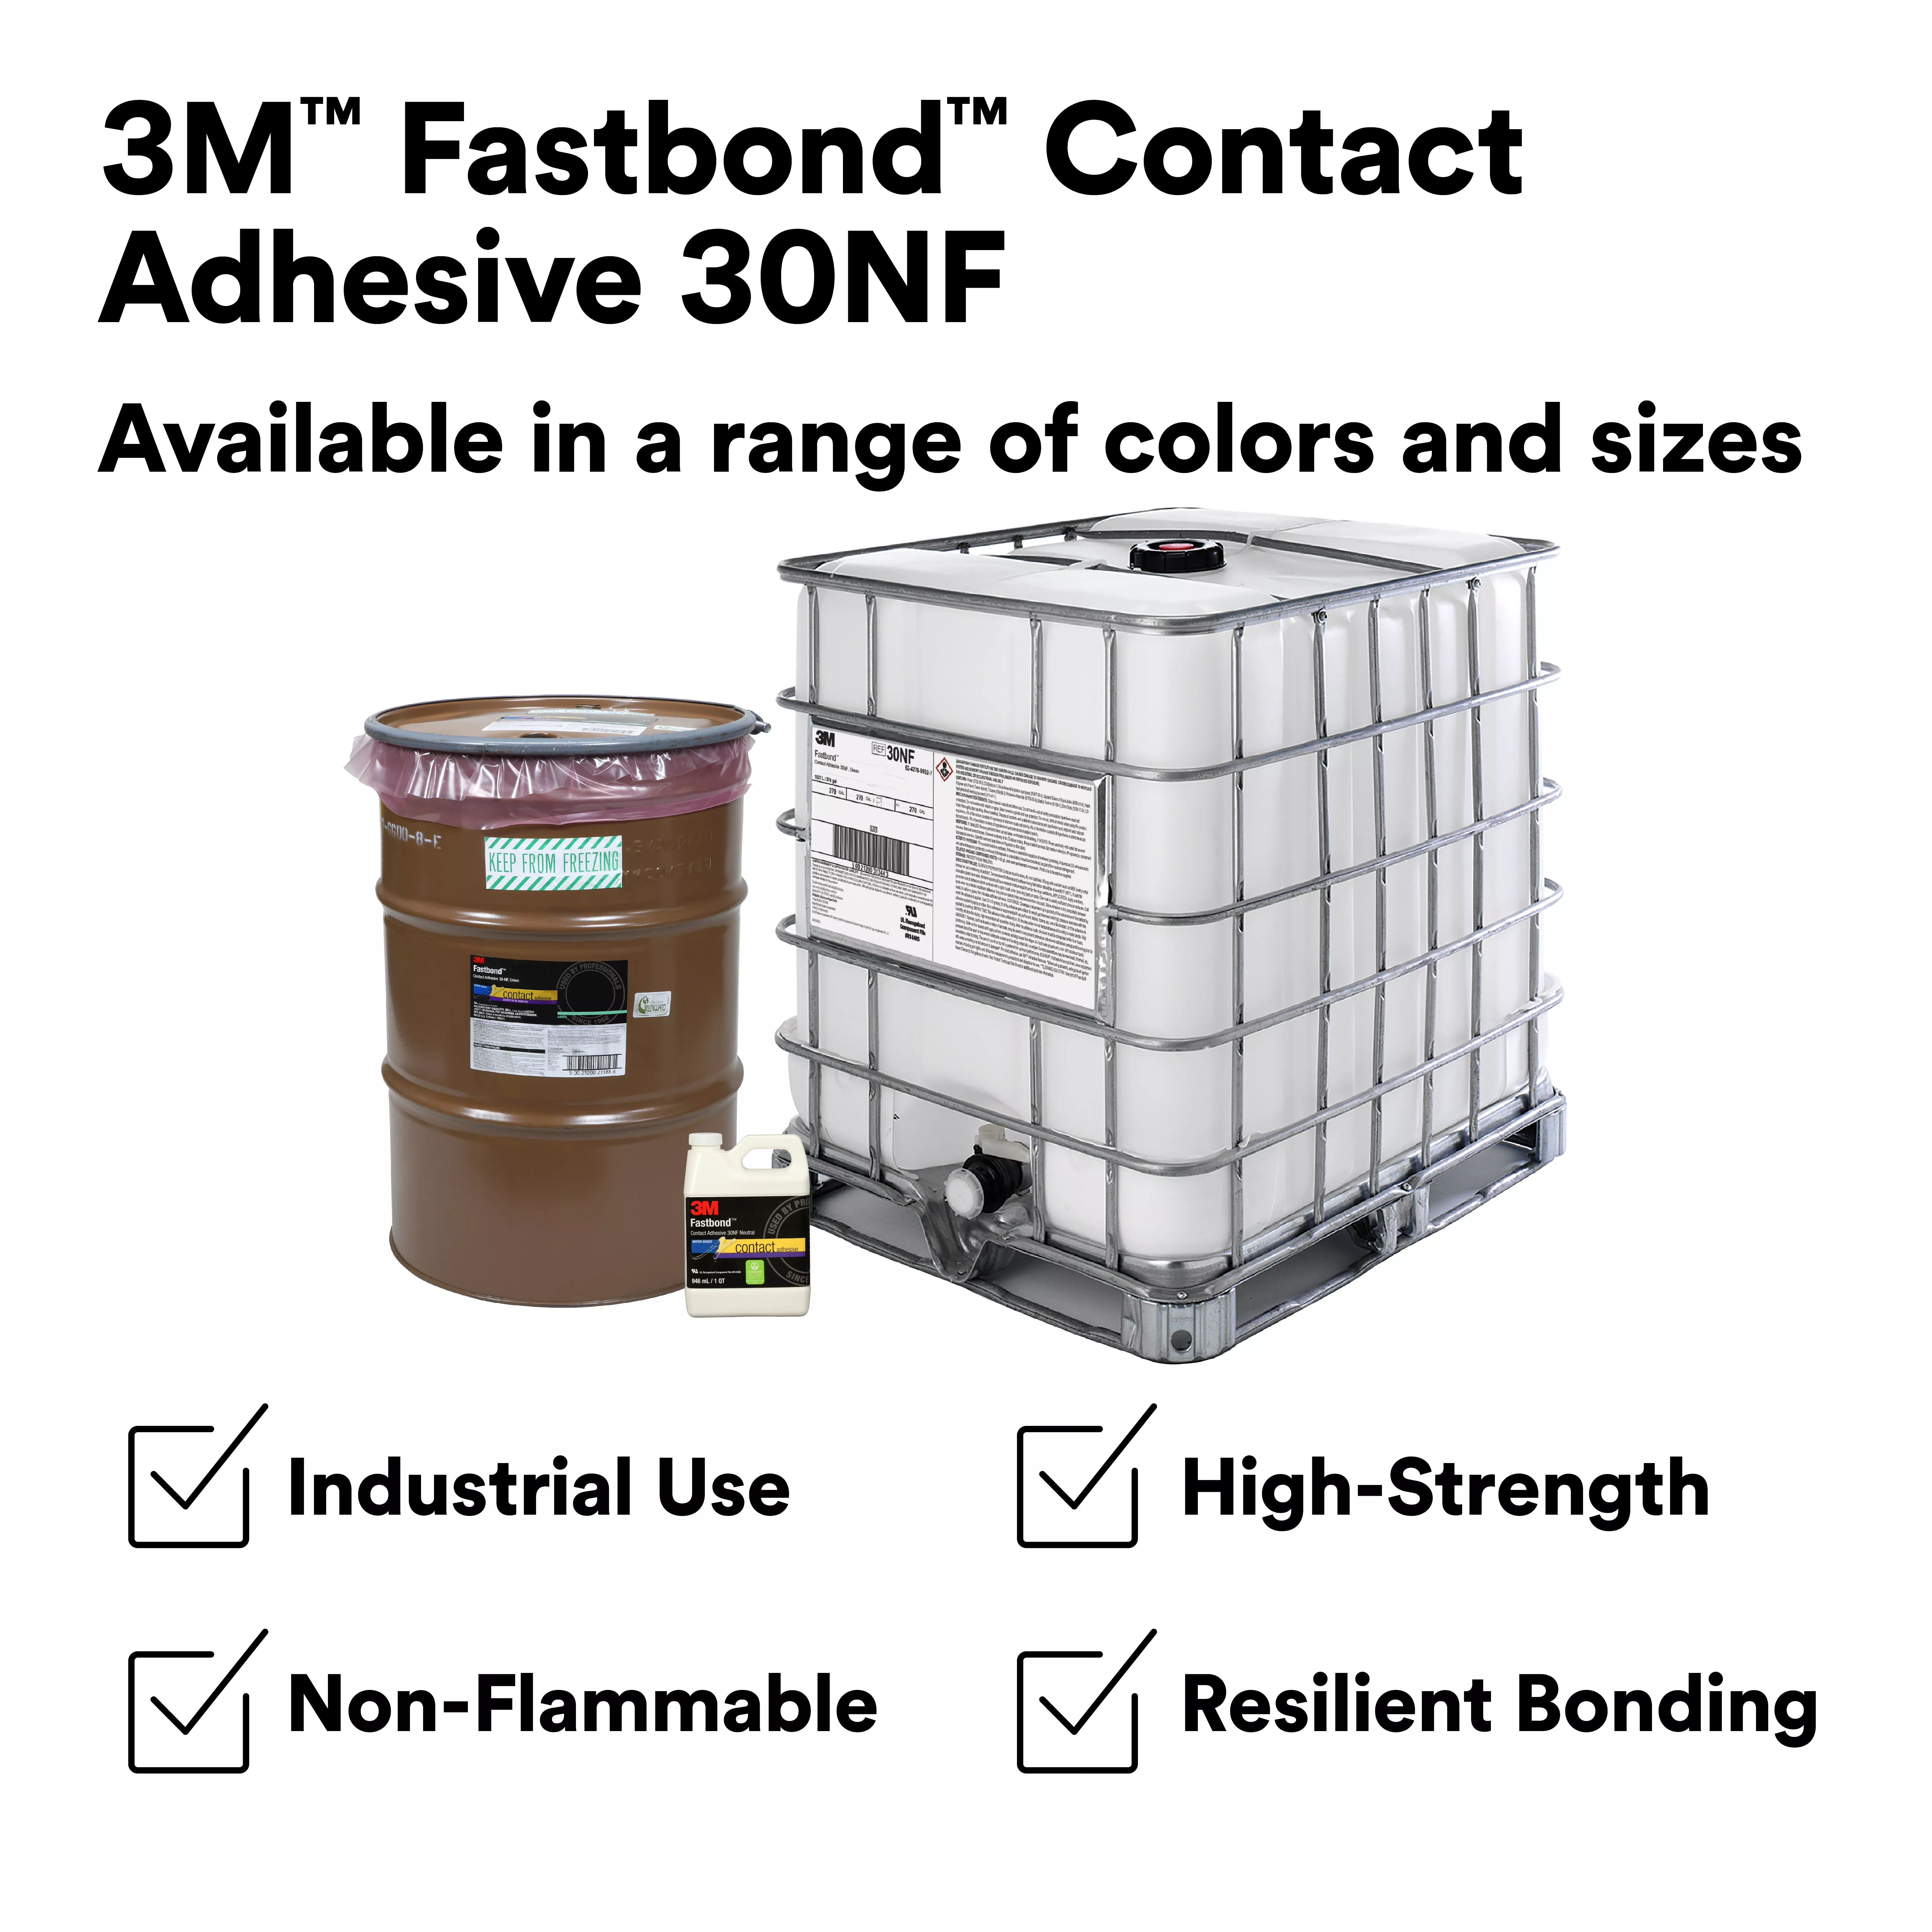 SKU 7000121383 | 3M™ Fastbond™ Contact Adhesive 30NF